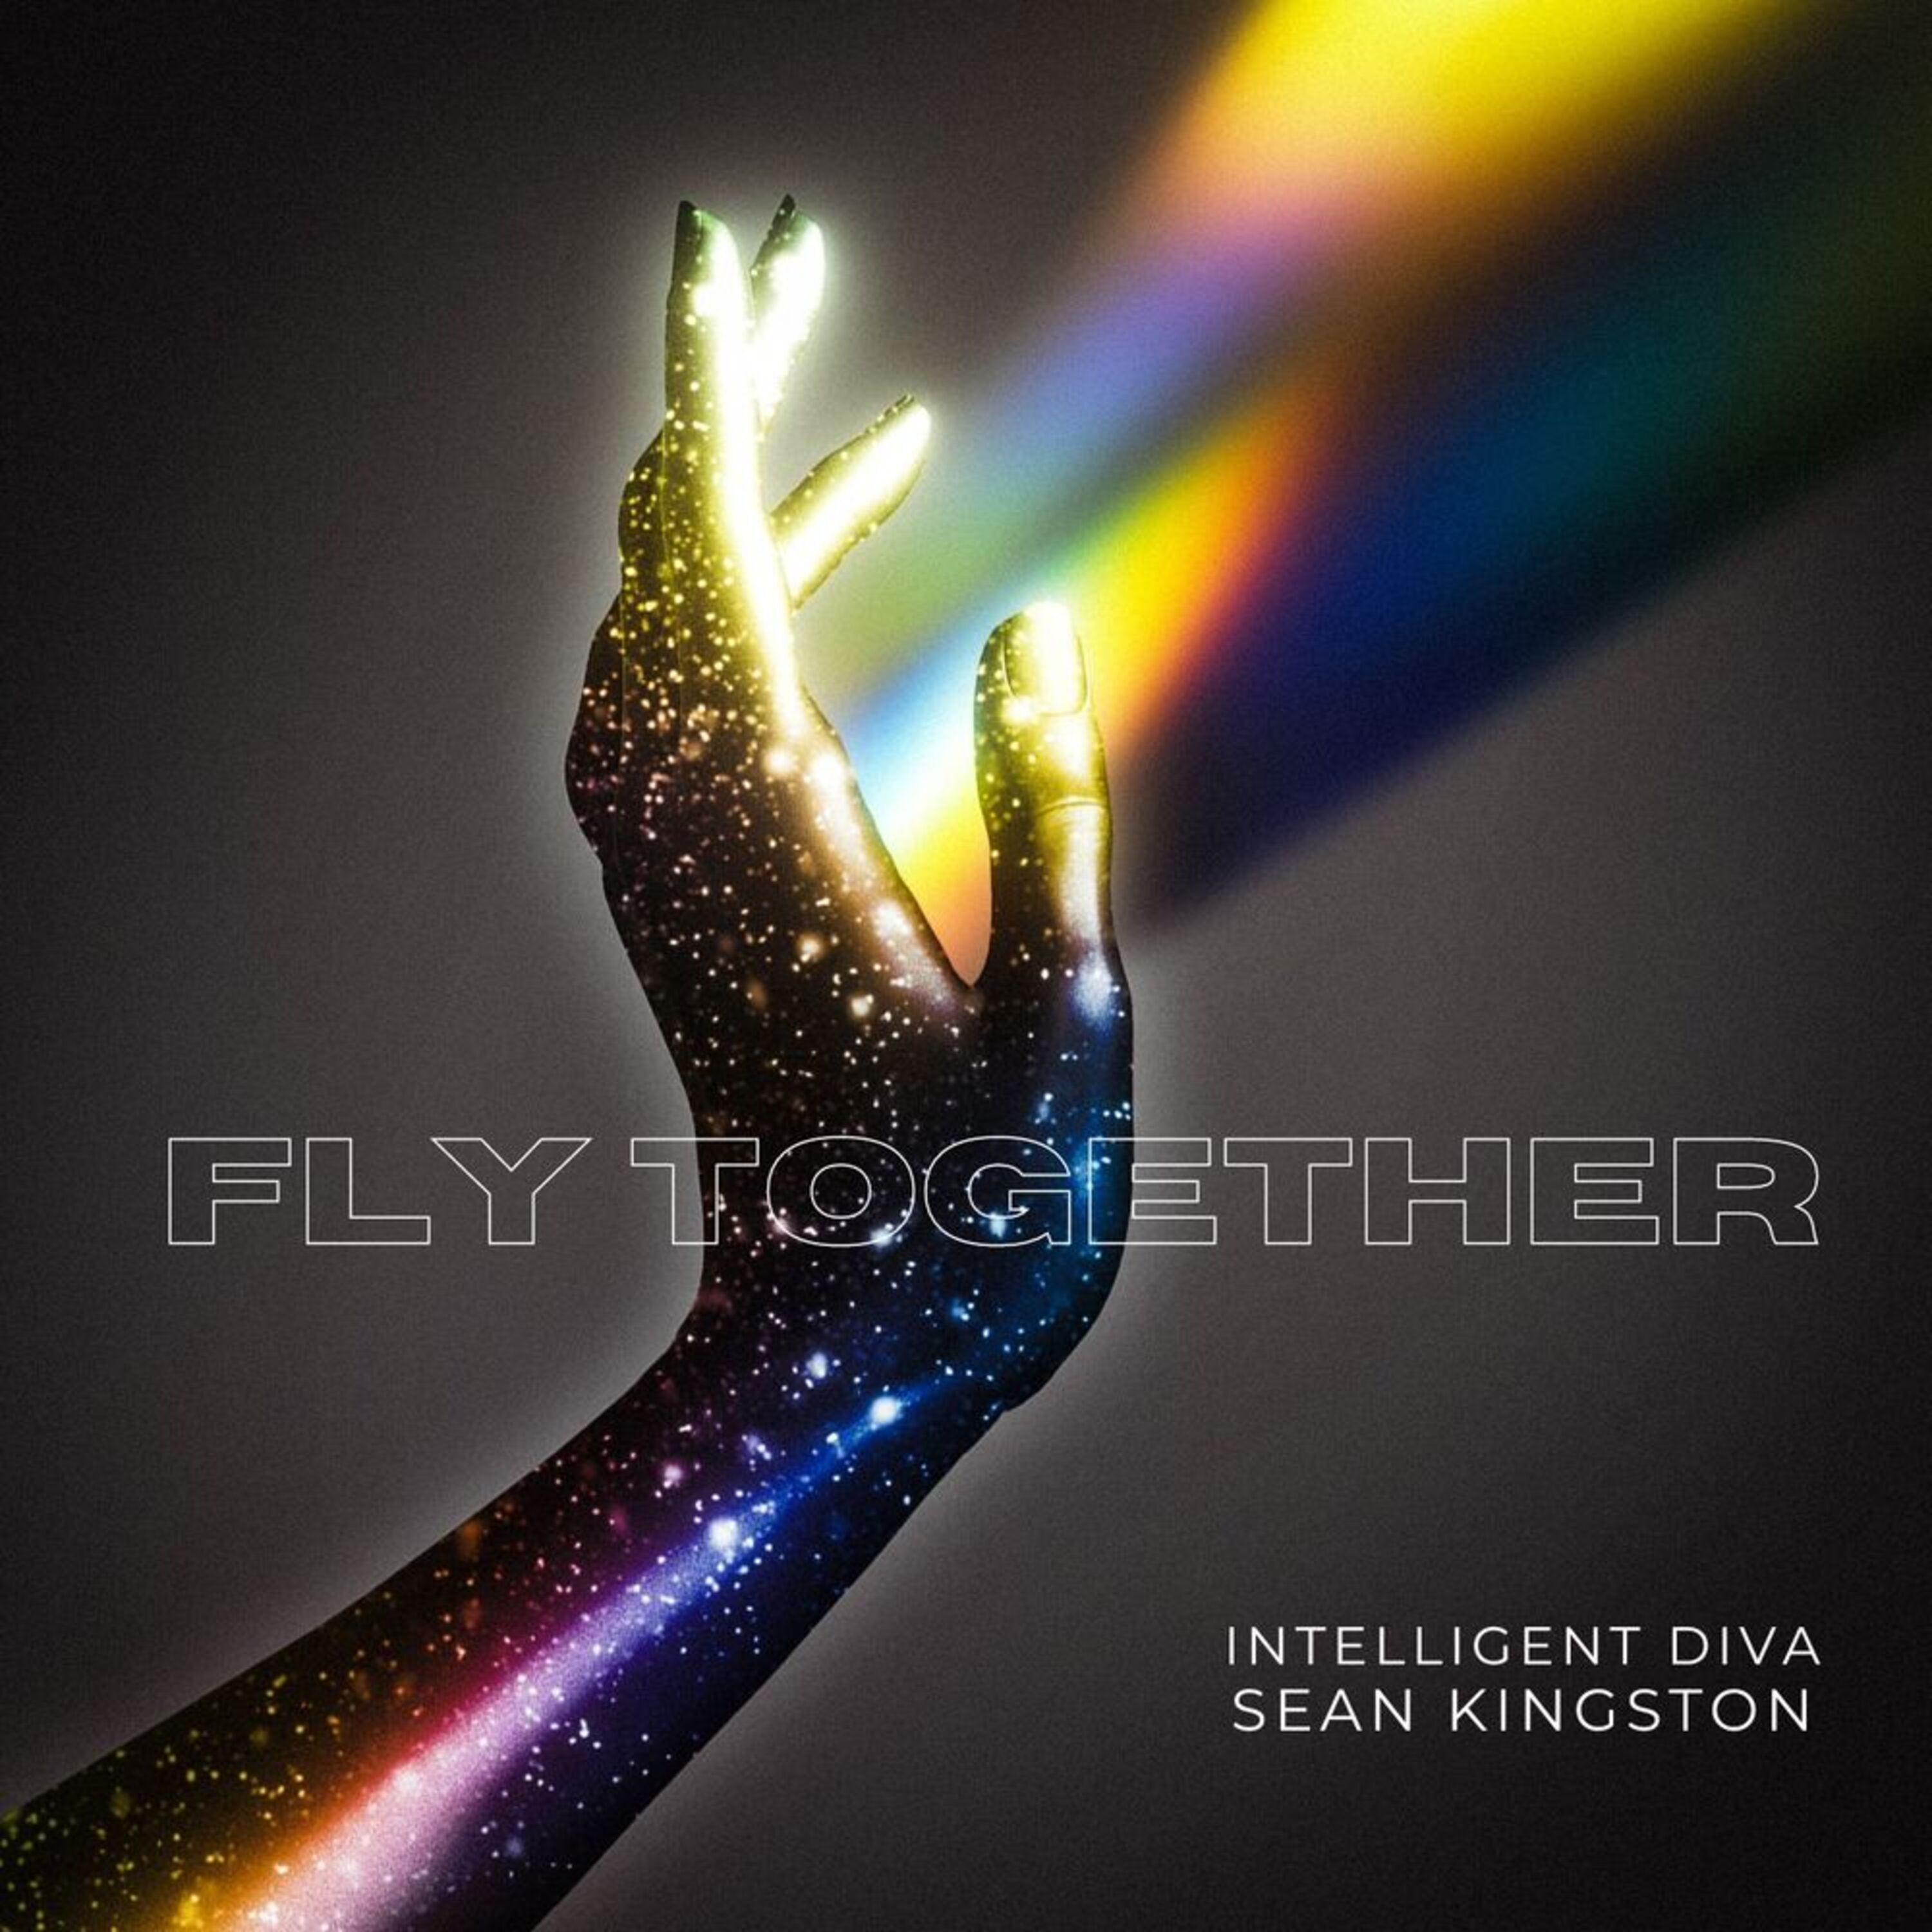 Billboard artist ‘Intelligent Diva’ teams up with ‘Sean Kingston’ for new single ‘Fly Together’.